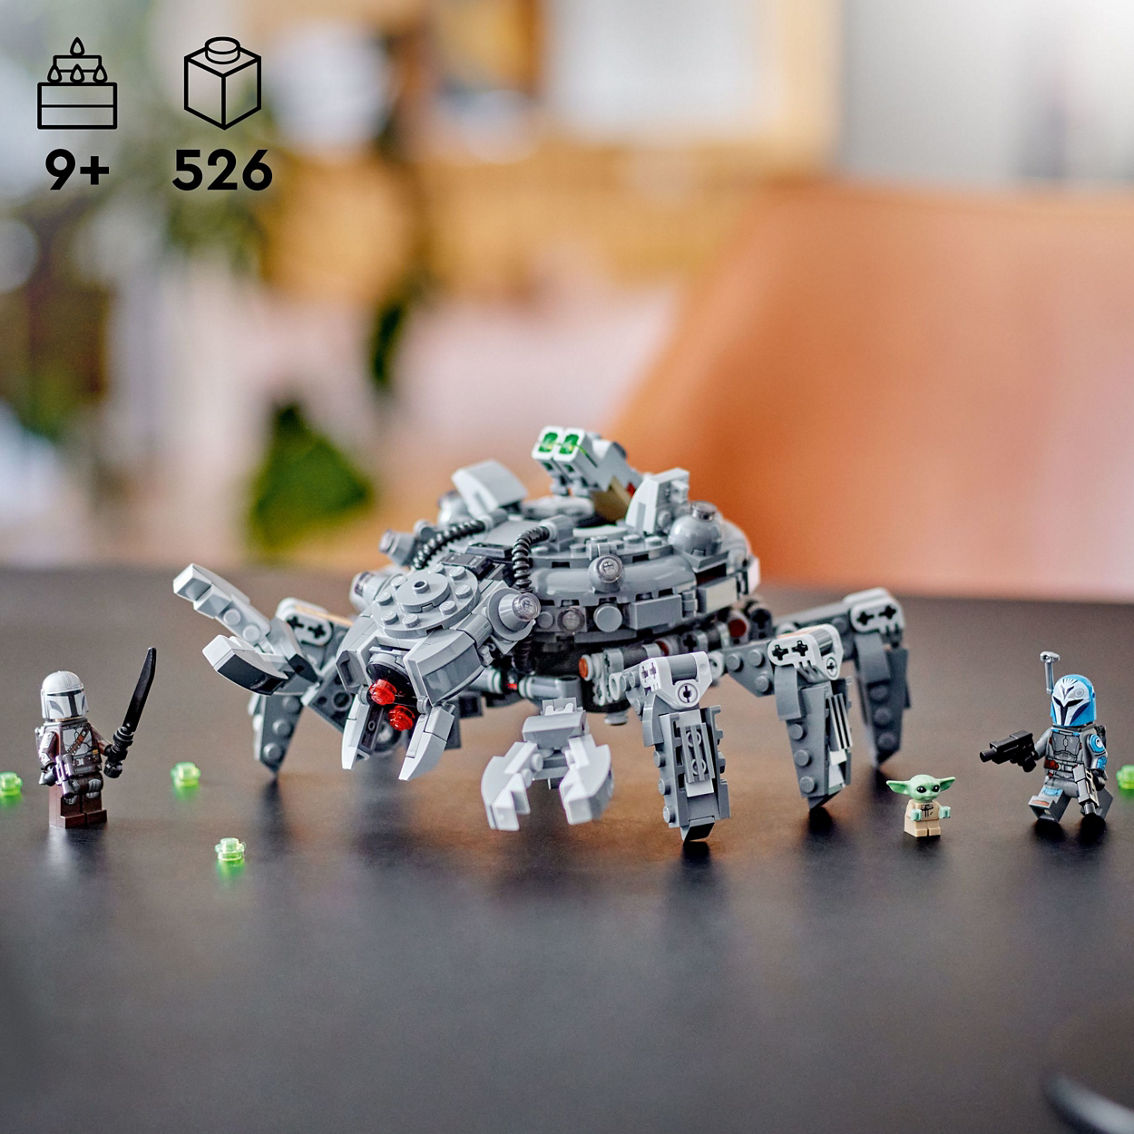 LEGO Star Wars: The Mandalorian Spider Tank Building Toy Set 75361 - Image 9 of 10